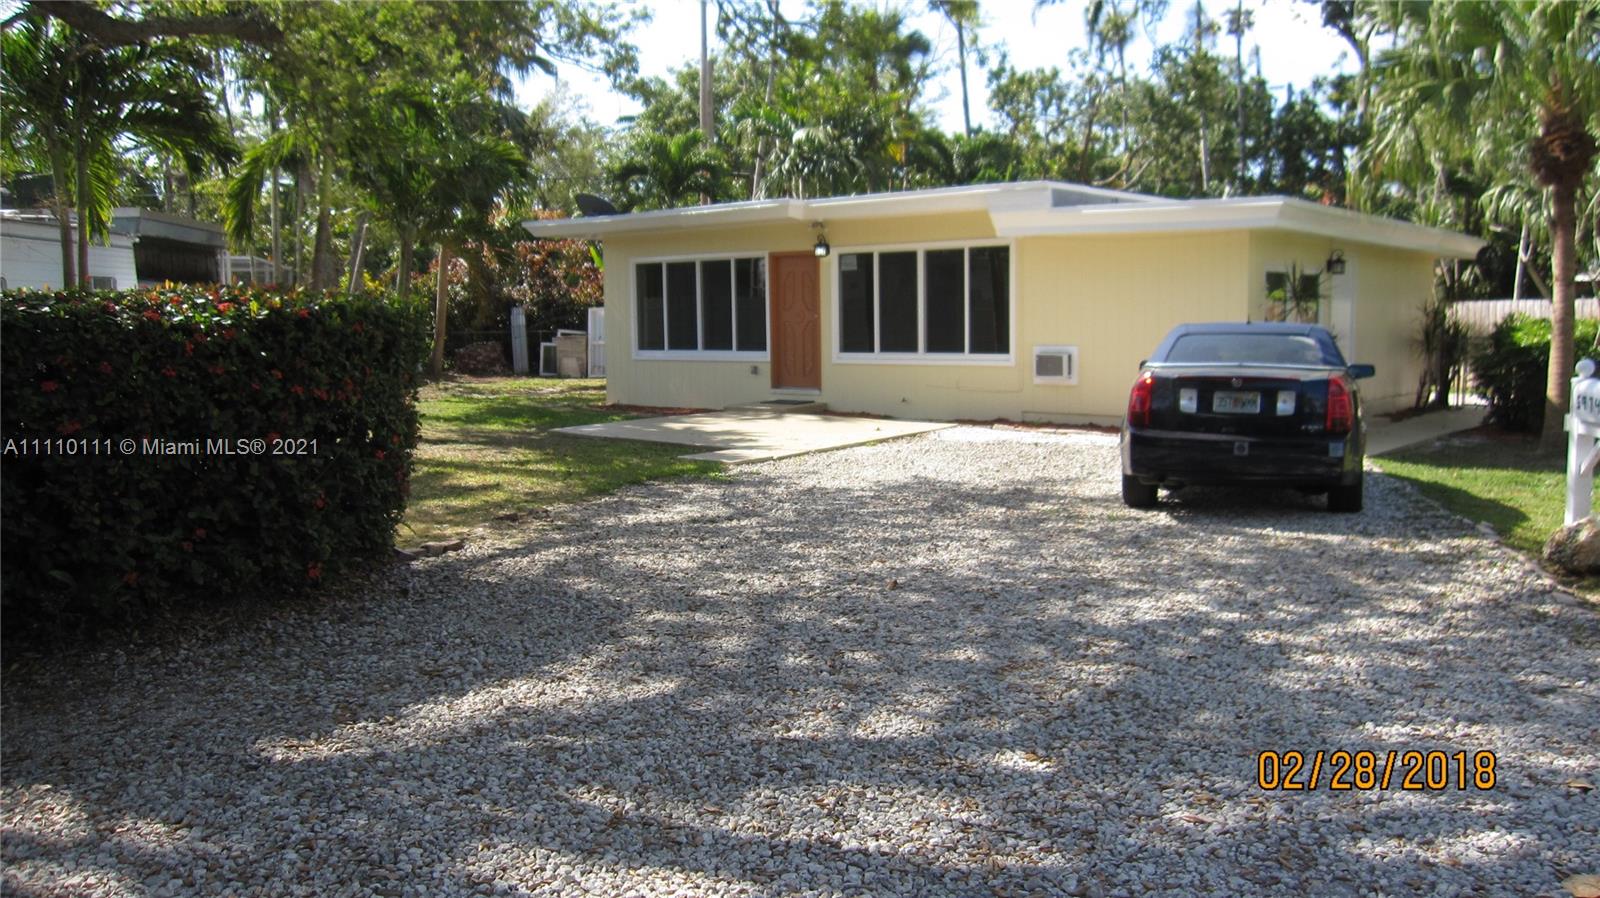 Cozy duplex home, 2/1 and efficiency for sale with 5852 SW 60th Ave, A11110020. Minutes from UM, South Miami Hospital, Downtown South Miami and easy access to the major highways. Freshly painted inside and out, newly polished Terrazzo floors, updated kitchen, washer and dryer on site, lots of parking in front and a large paved back patio with fruit trees. Two bedrooms with large closets. Completely new Bathroom with walk in shower and new fixtures.